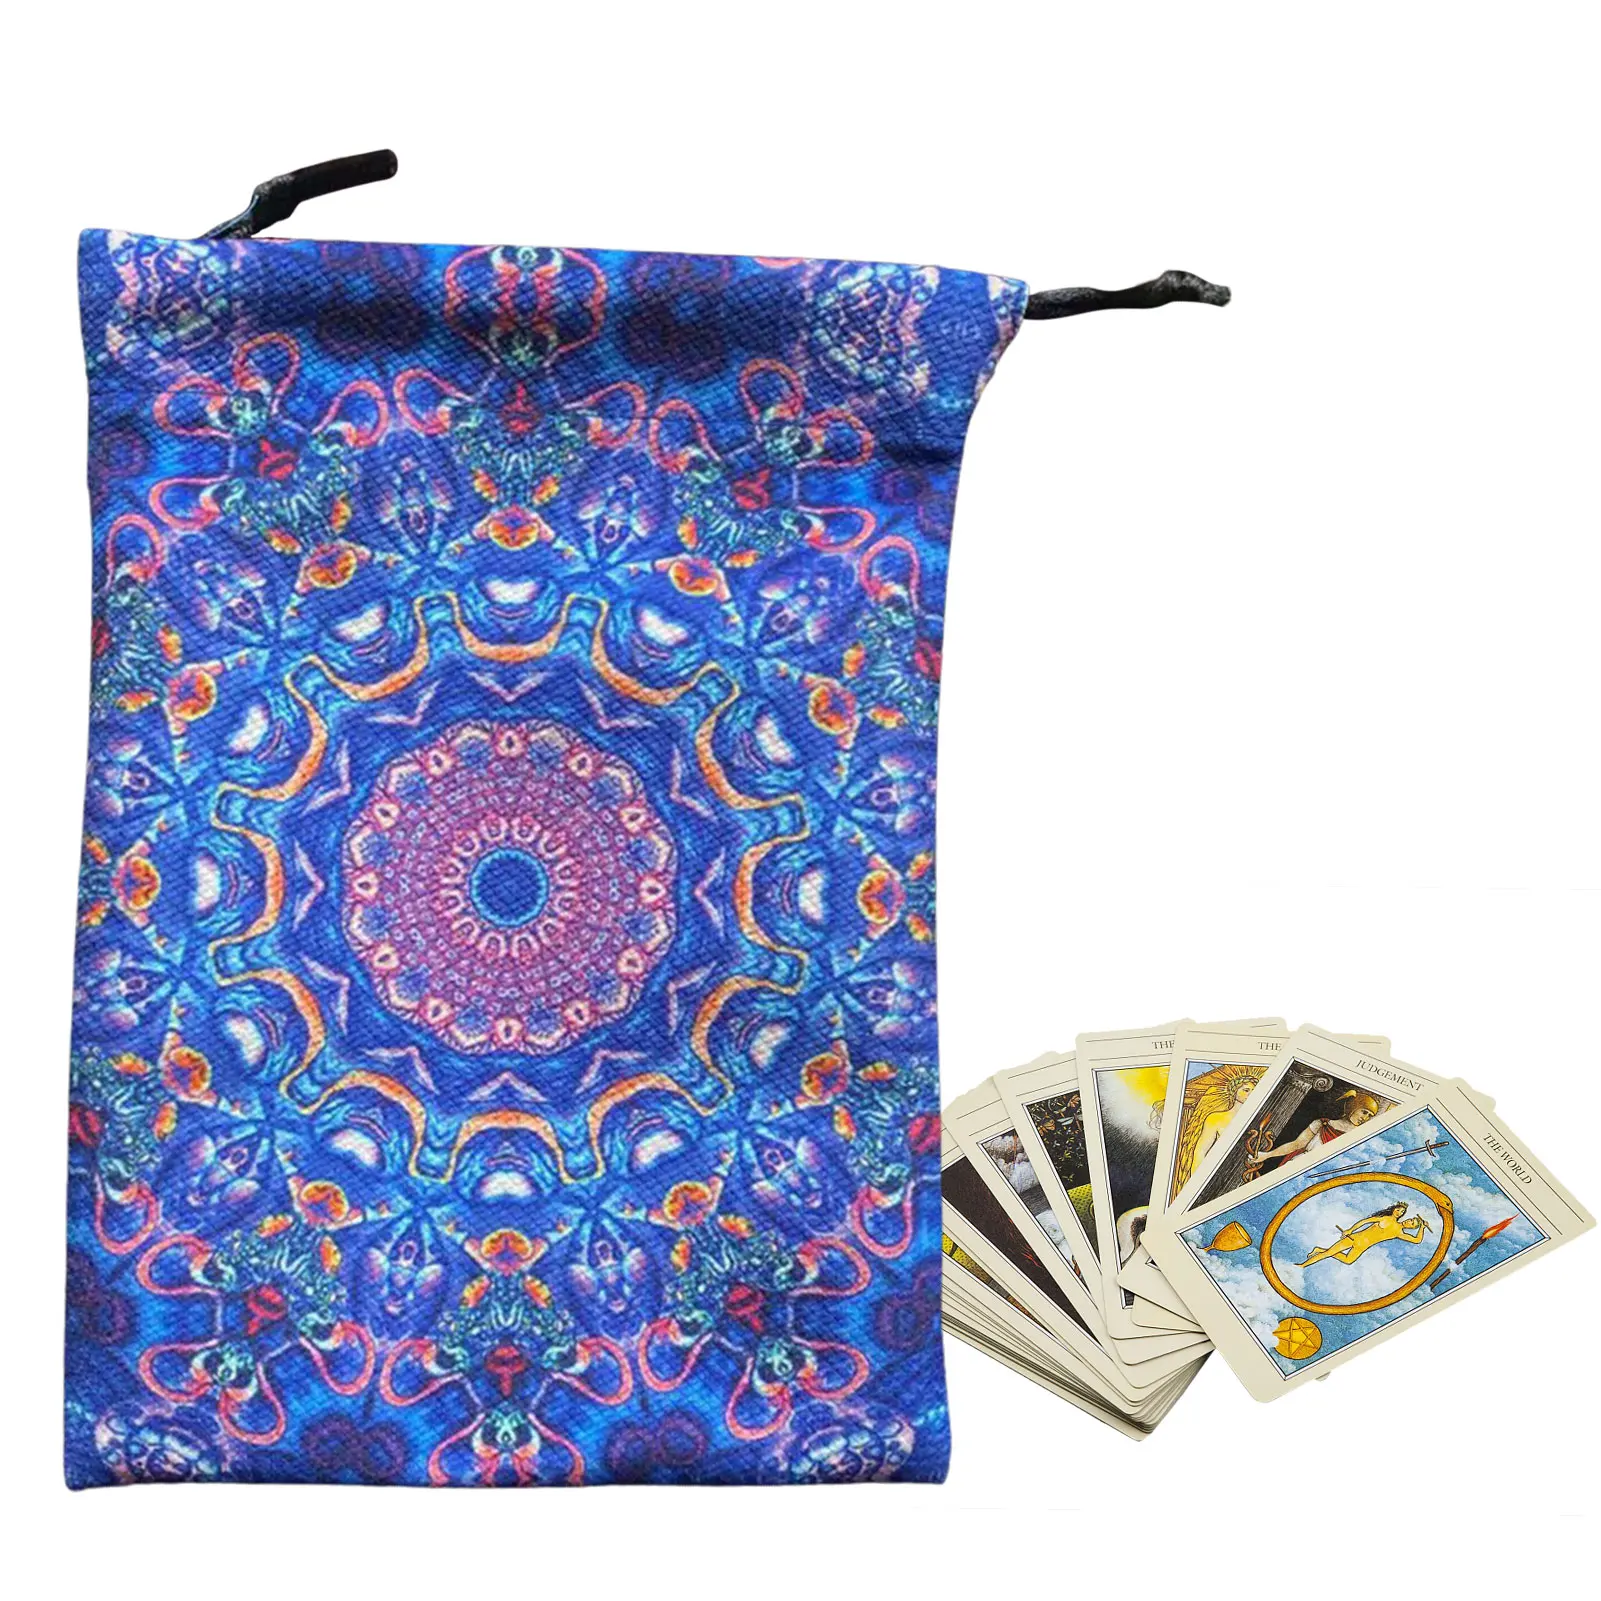 

New Tarot Oracle Cards Storage Bag Runes Constellation Witch Divination Accessories Jewelry Dice Drawstring Package 13x18cm